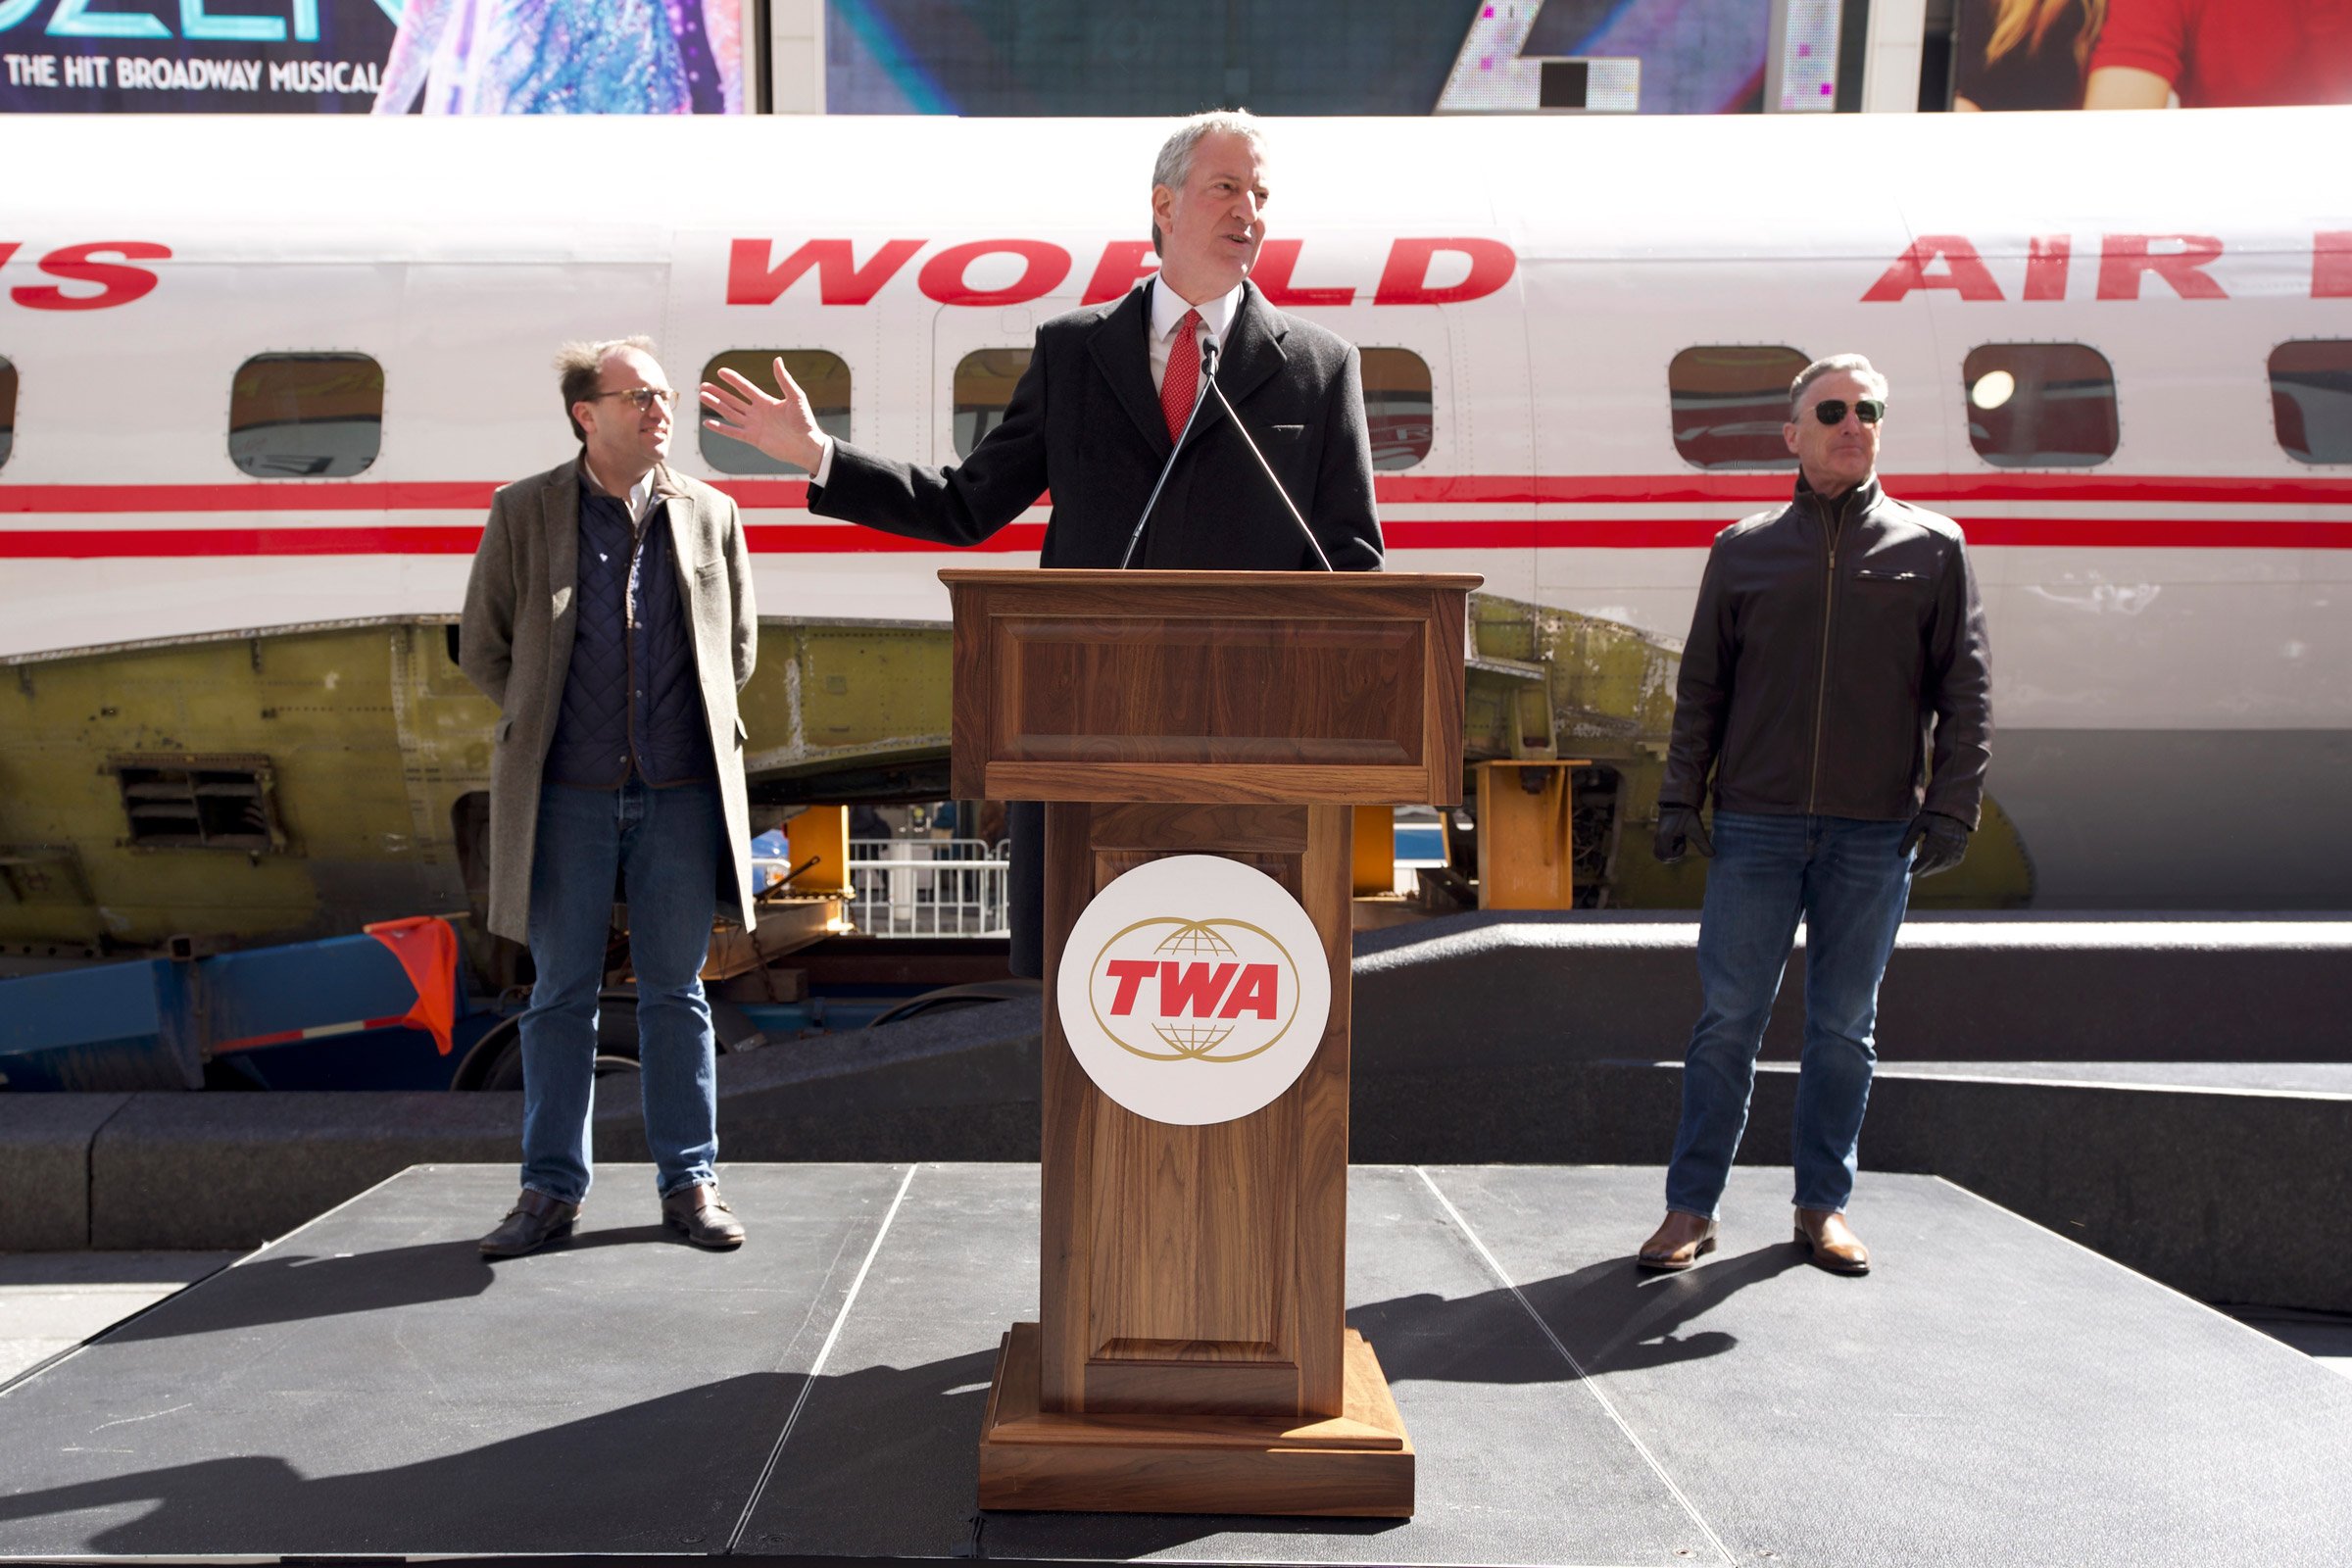 New York City Mayor Bill de Blasio (center) with CEO and Managing Partner of MCR and MORSE Development Tyler Morse (left) and New York Hotel and Motel Trades Council President Peter Ward (right) on March 23, 2019. 